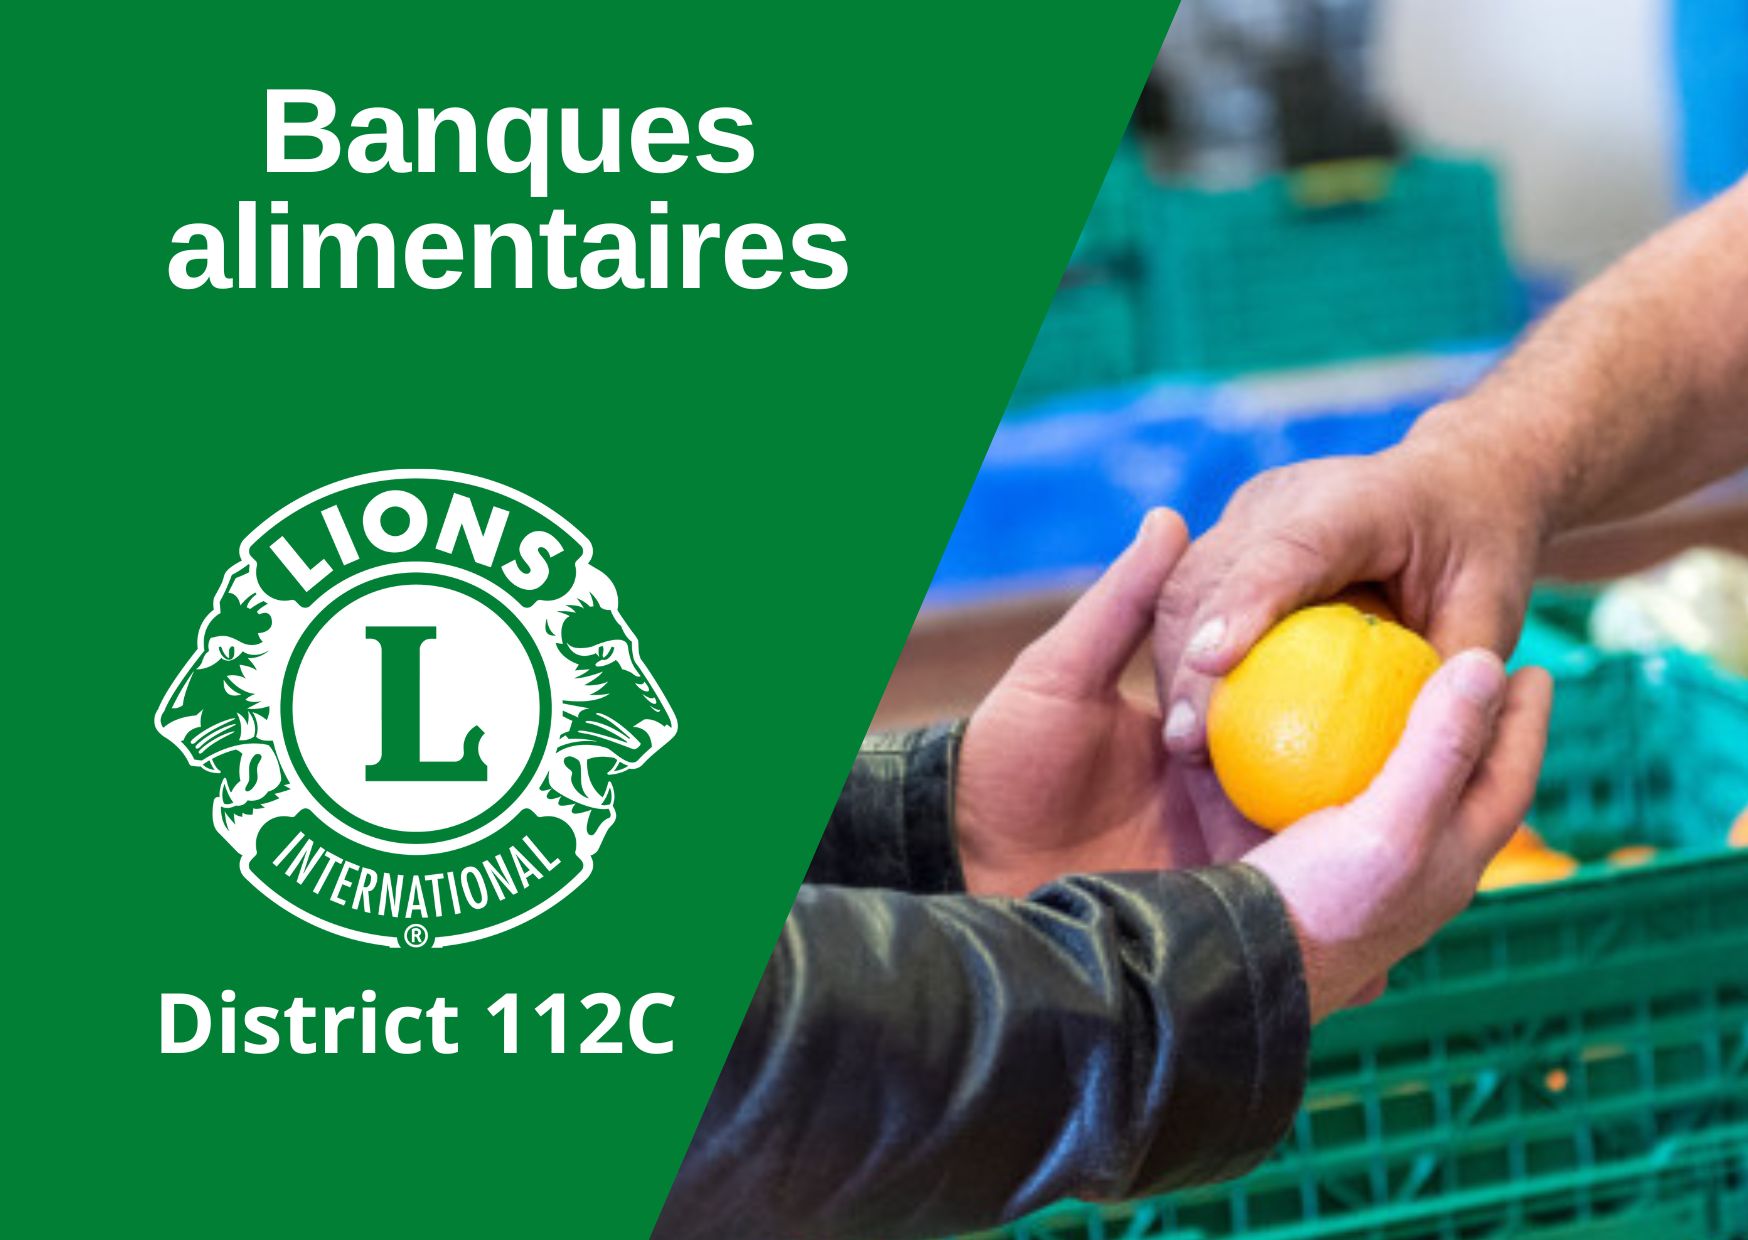 banques alimentaires